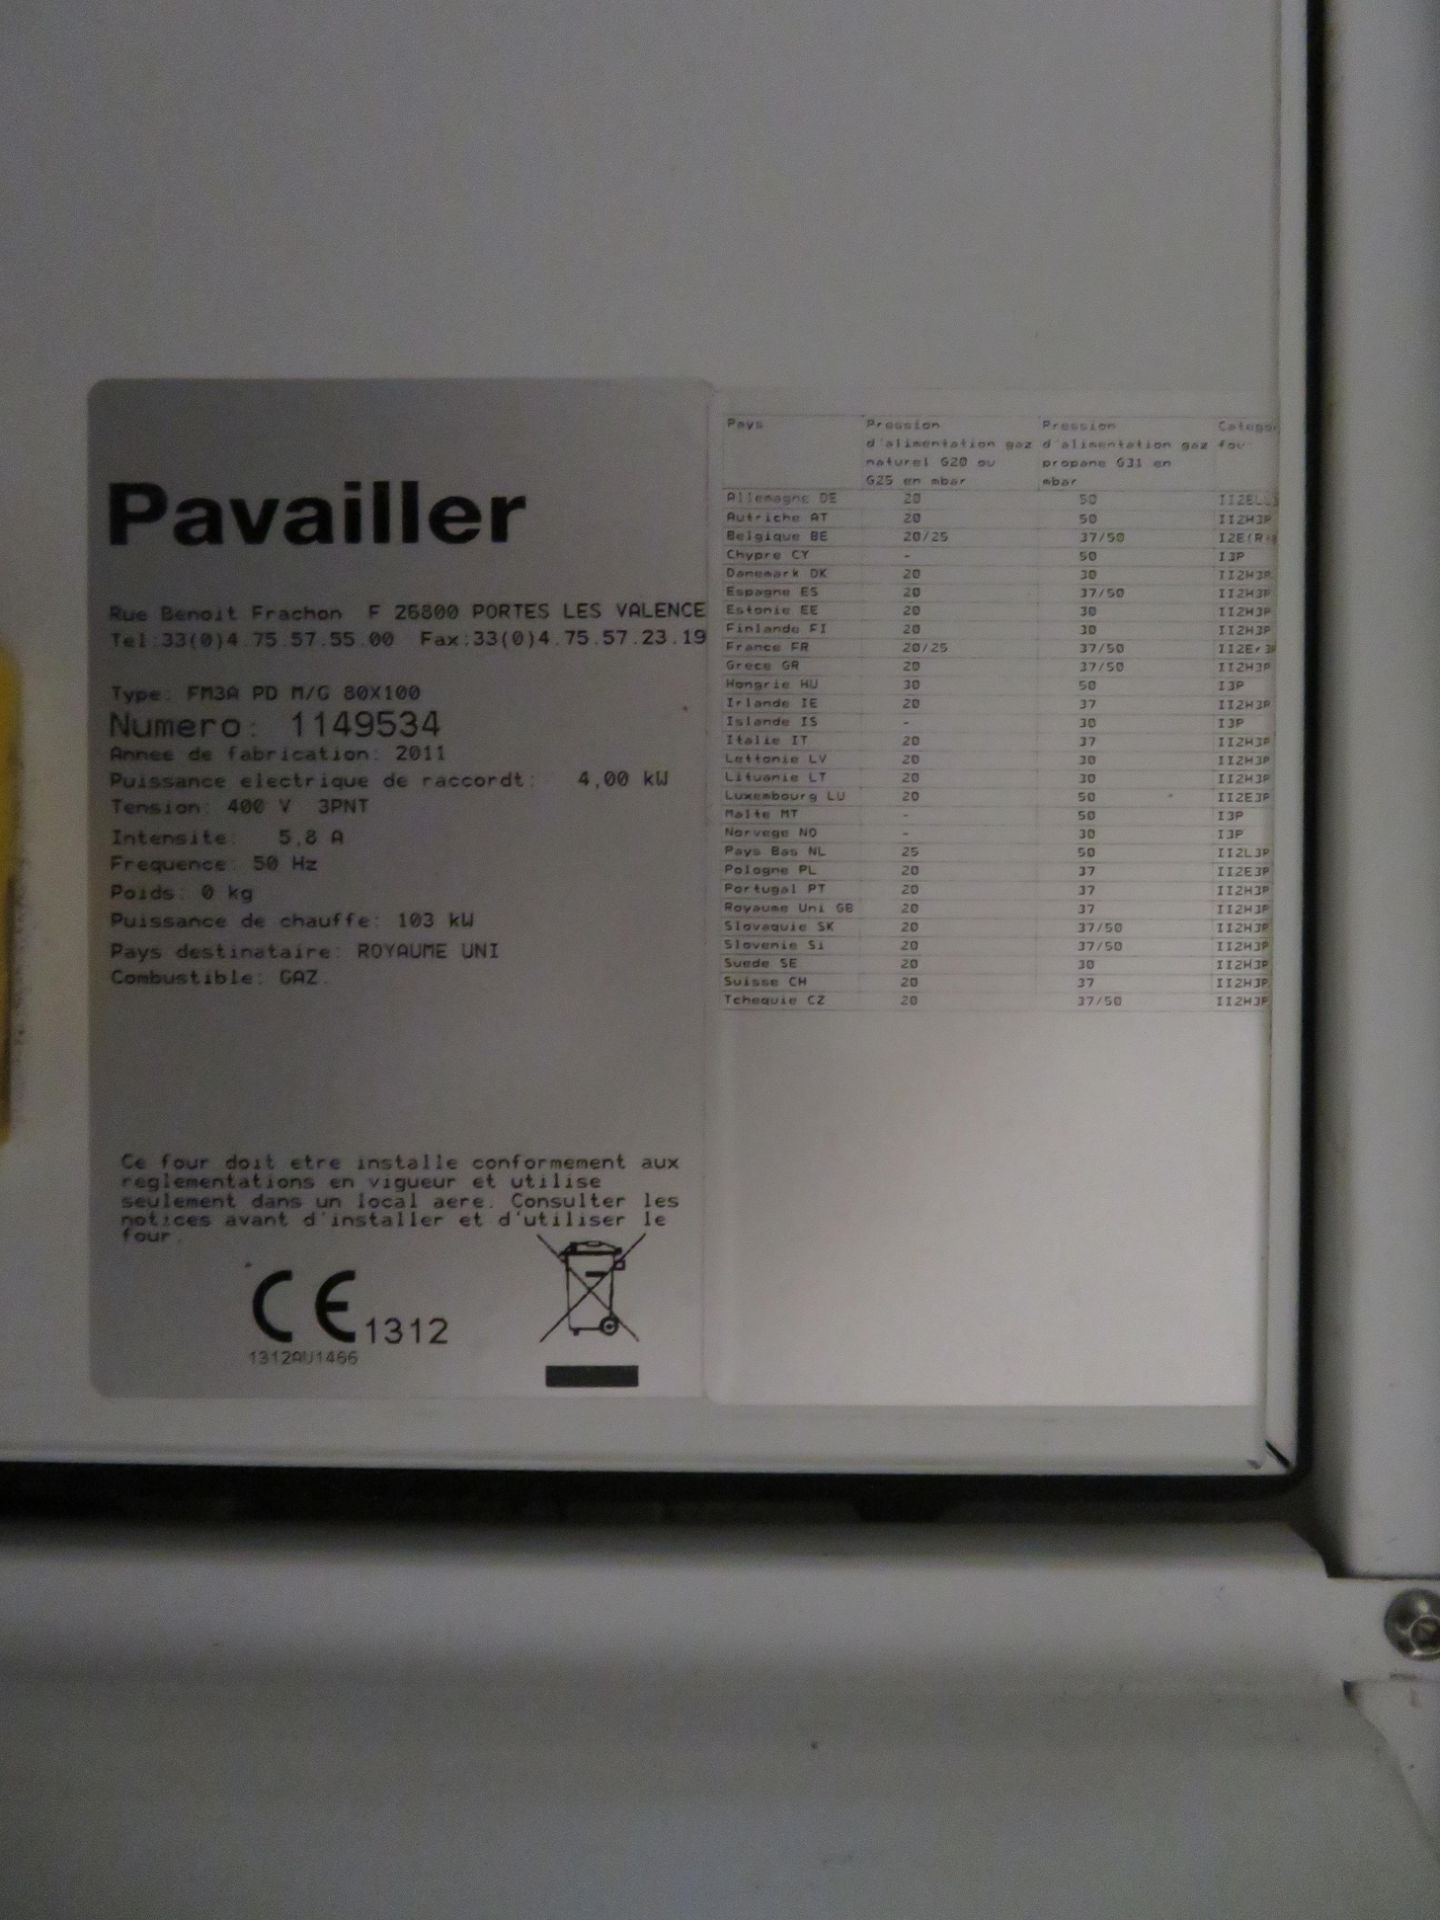 2011 Pavailler Type FM3A PD M/G 80 x 100 Rotary Gas Baker's Oven - Image 4 of 4